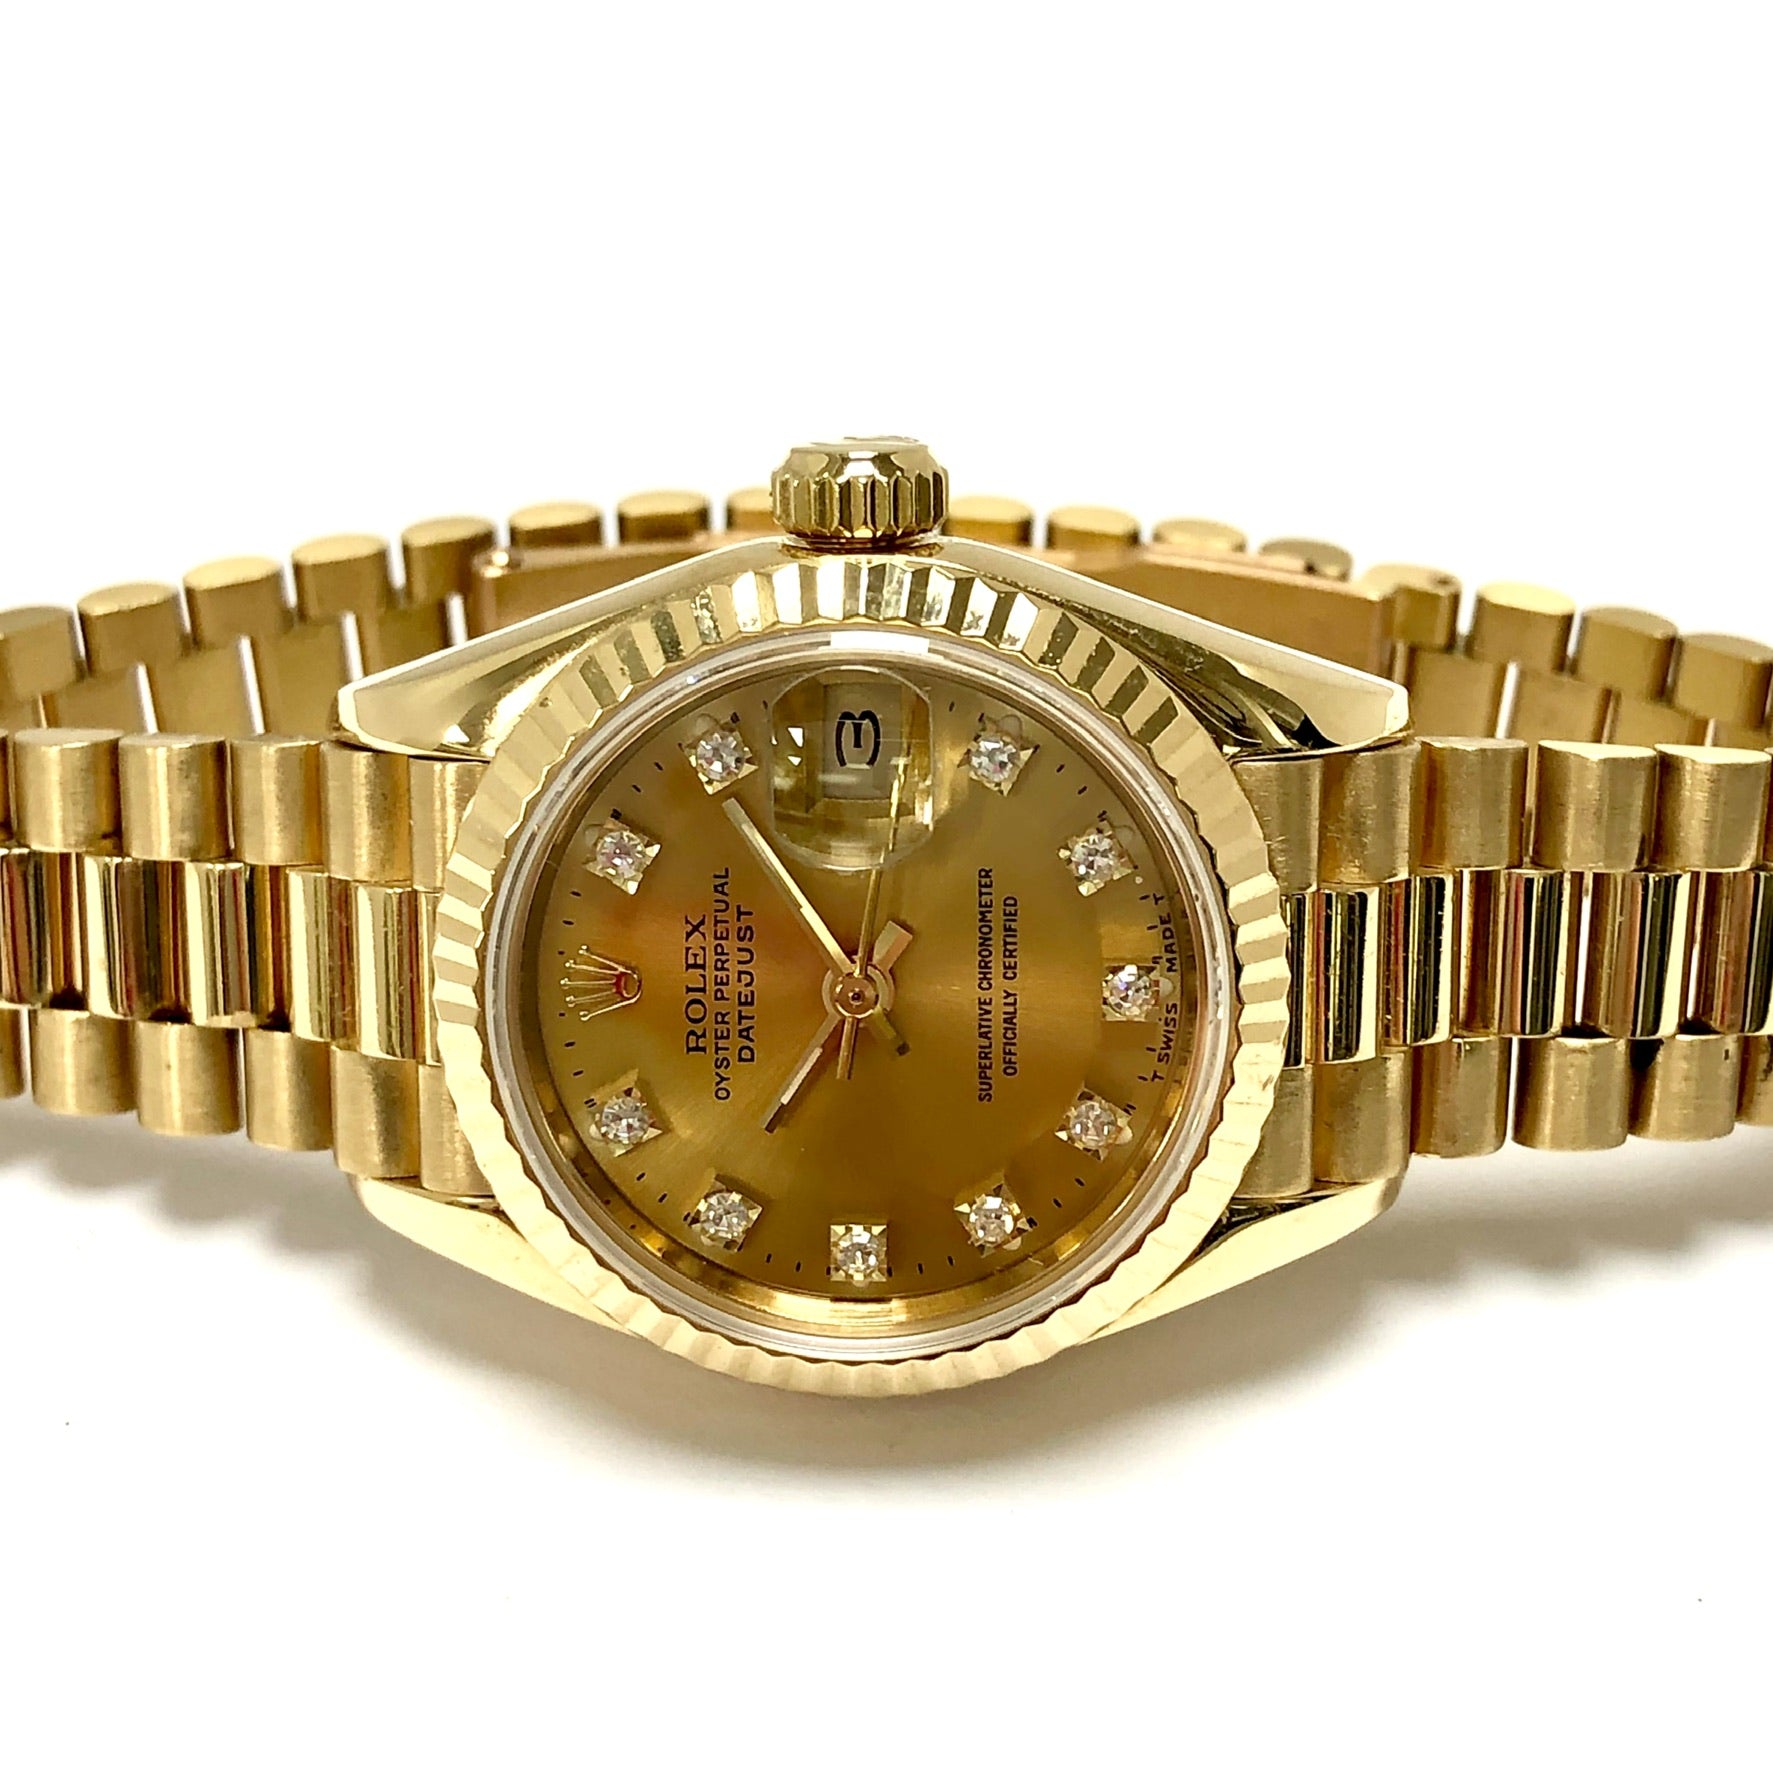 ROLEX OYSTER PERPETUAL DATEJUST Presidential 26mm 18K Yellow Gold